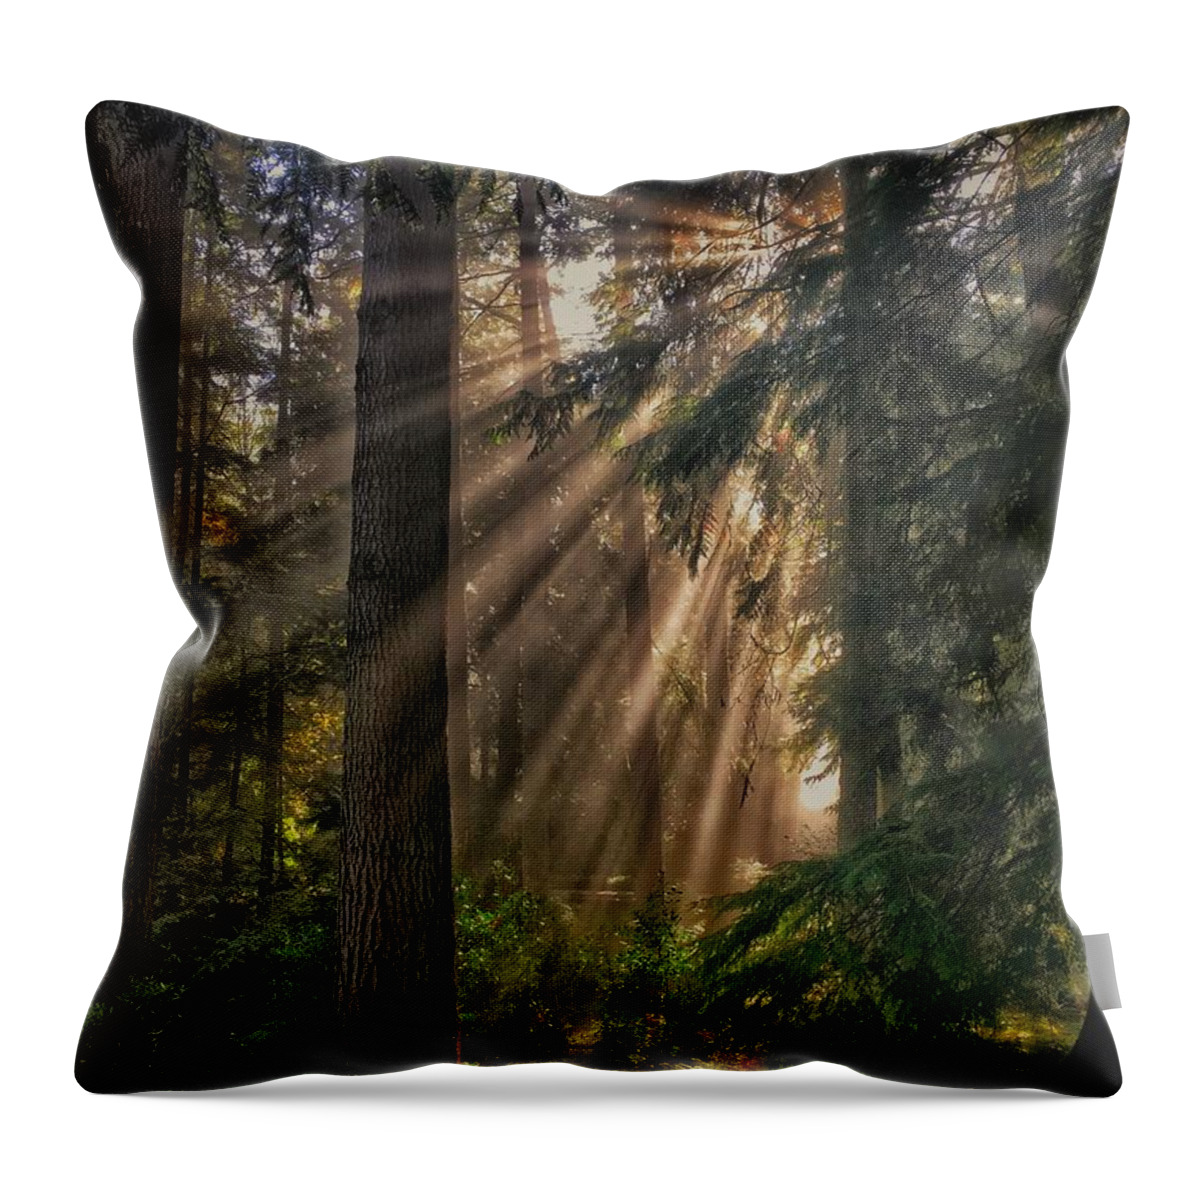 Forest Throw Pillow featuring the photograph Let There Be Light by Jerry Abbott